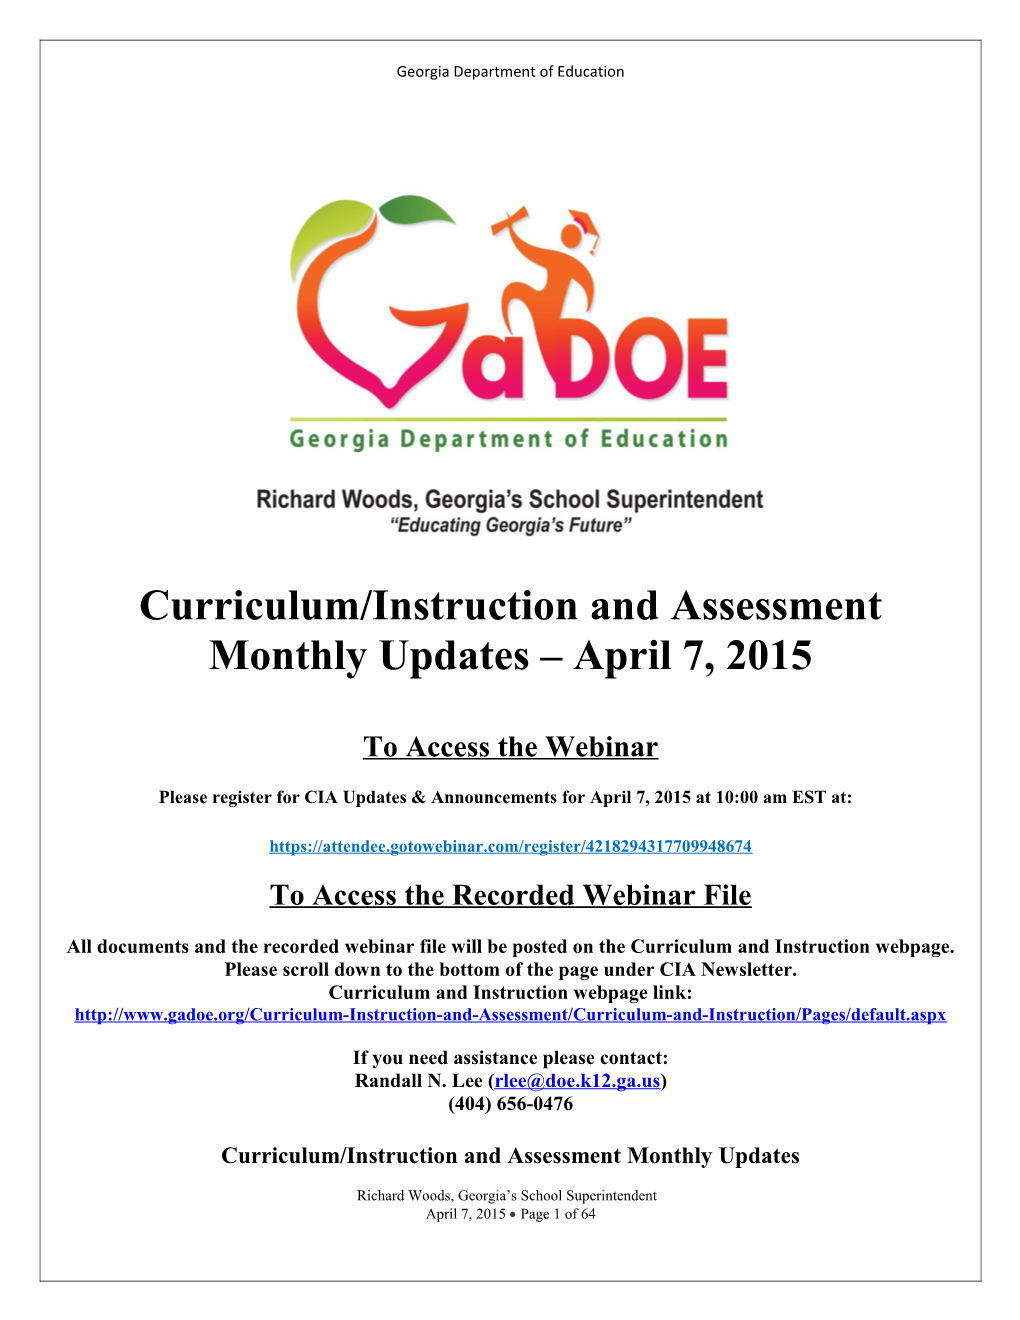 Curriculum/Instruction and Assessment Monthly Updates April 7, 2015